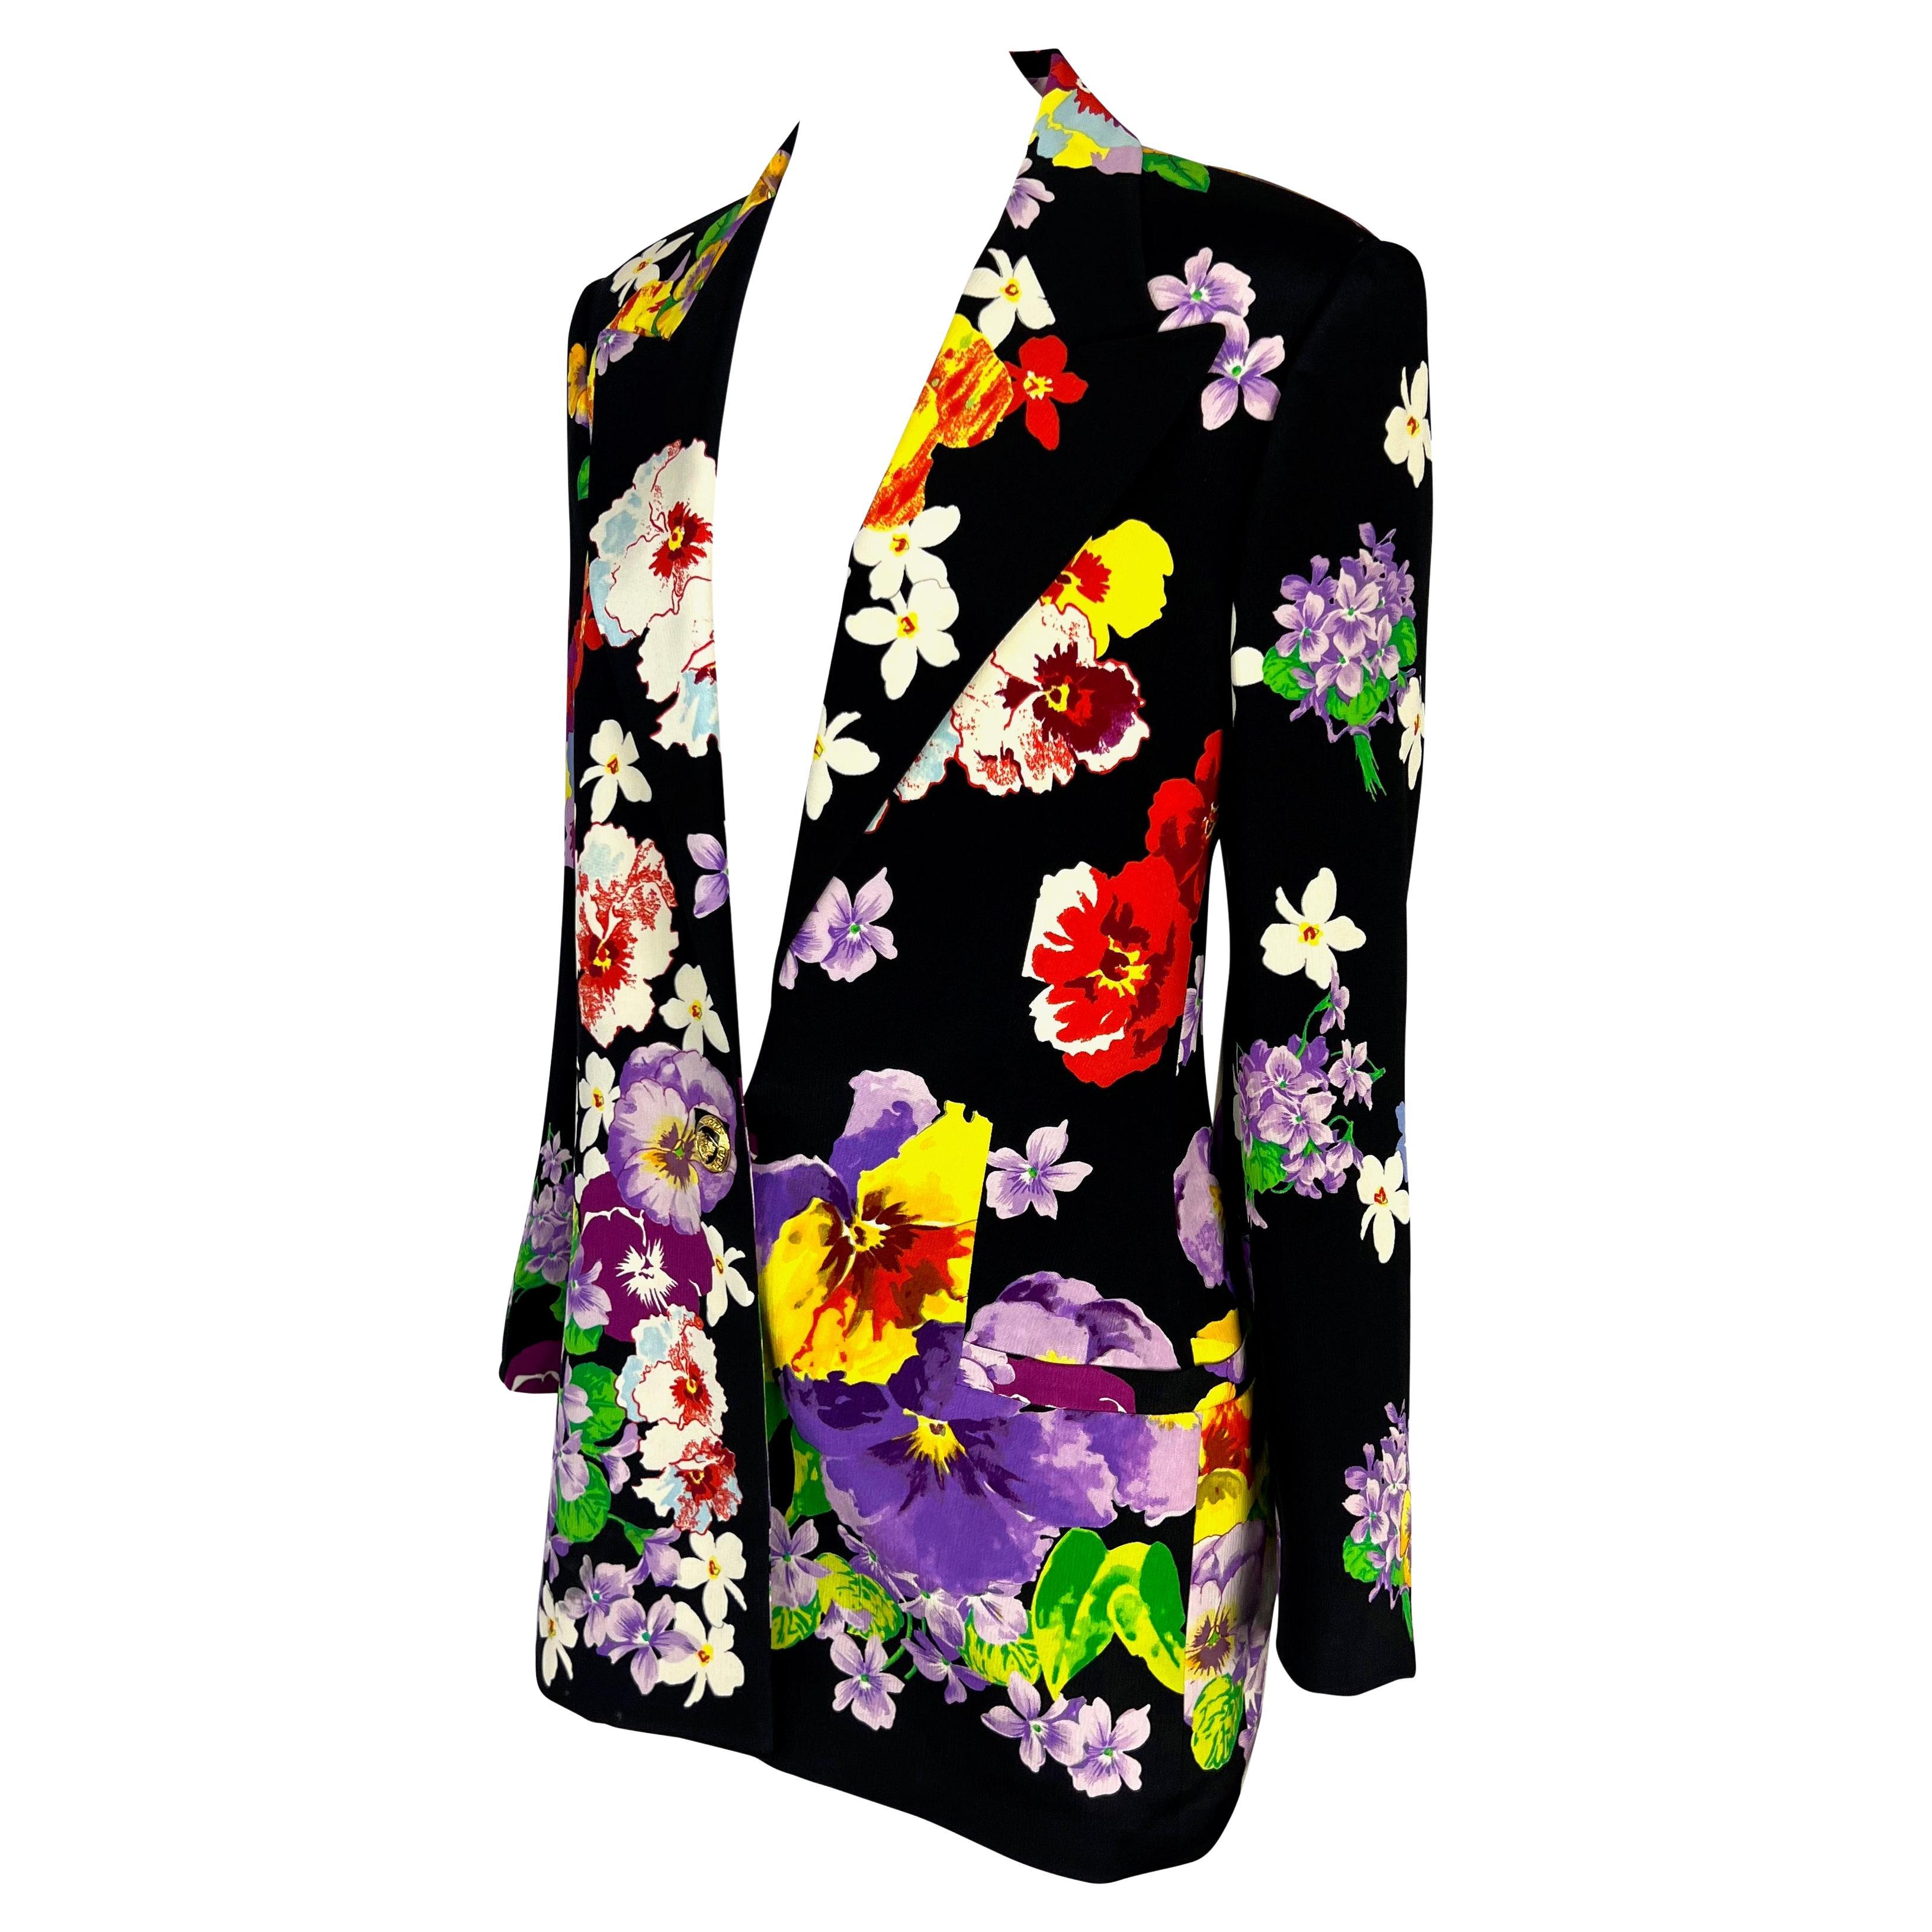 Presenting a beautiful multicolored floral Gianni Versace blazer, designed by Gianni Versace. From the Spring/Summer 1994 collection, this gorgeous blazer features a black background with a vibrant multicolor floral print on top. The added length